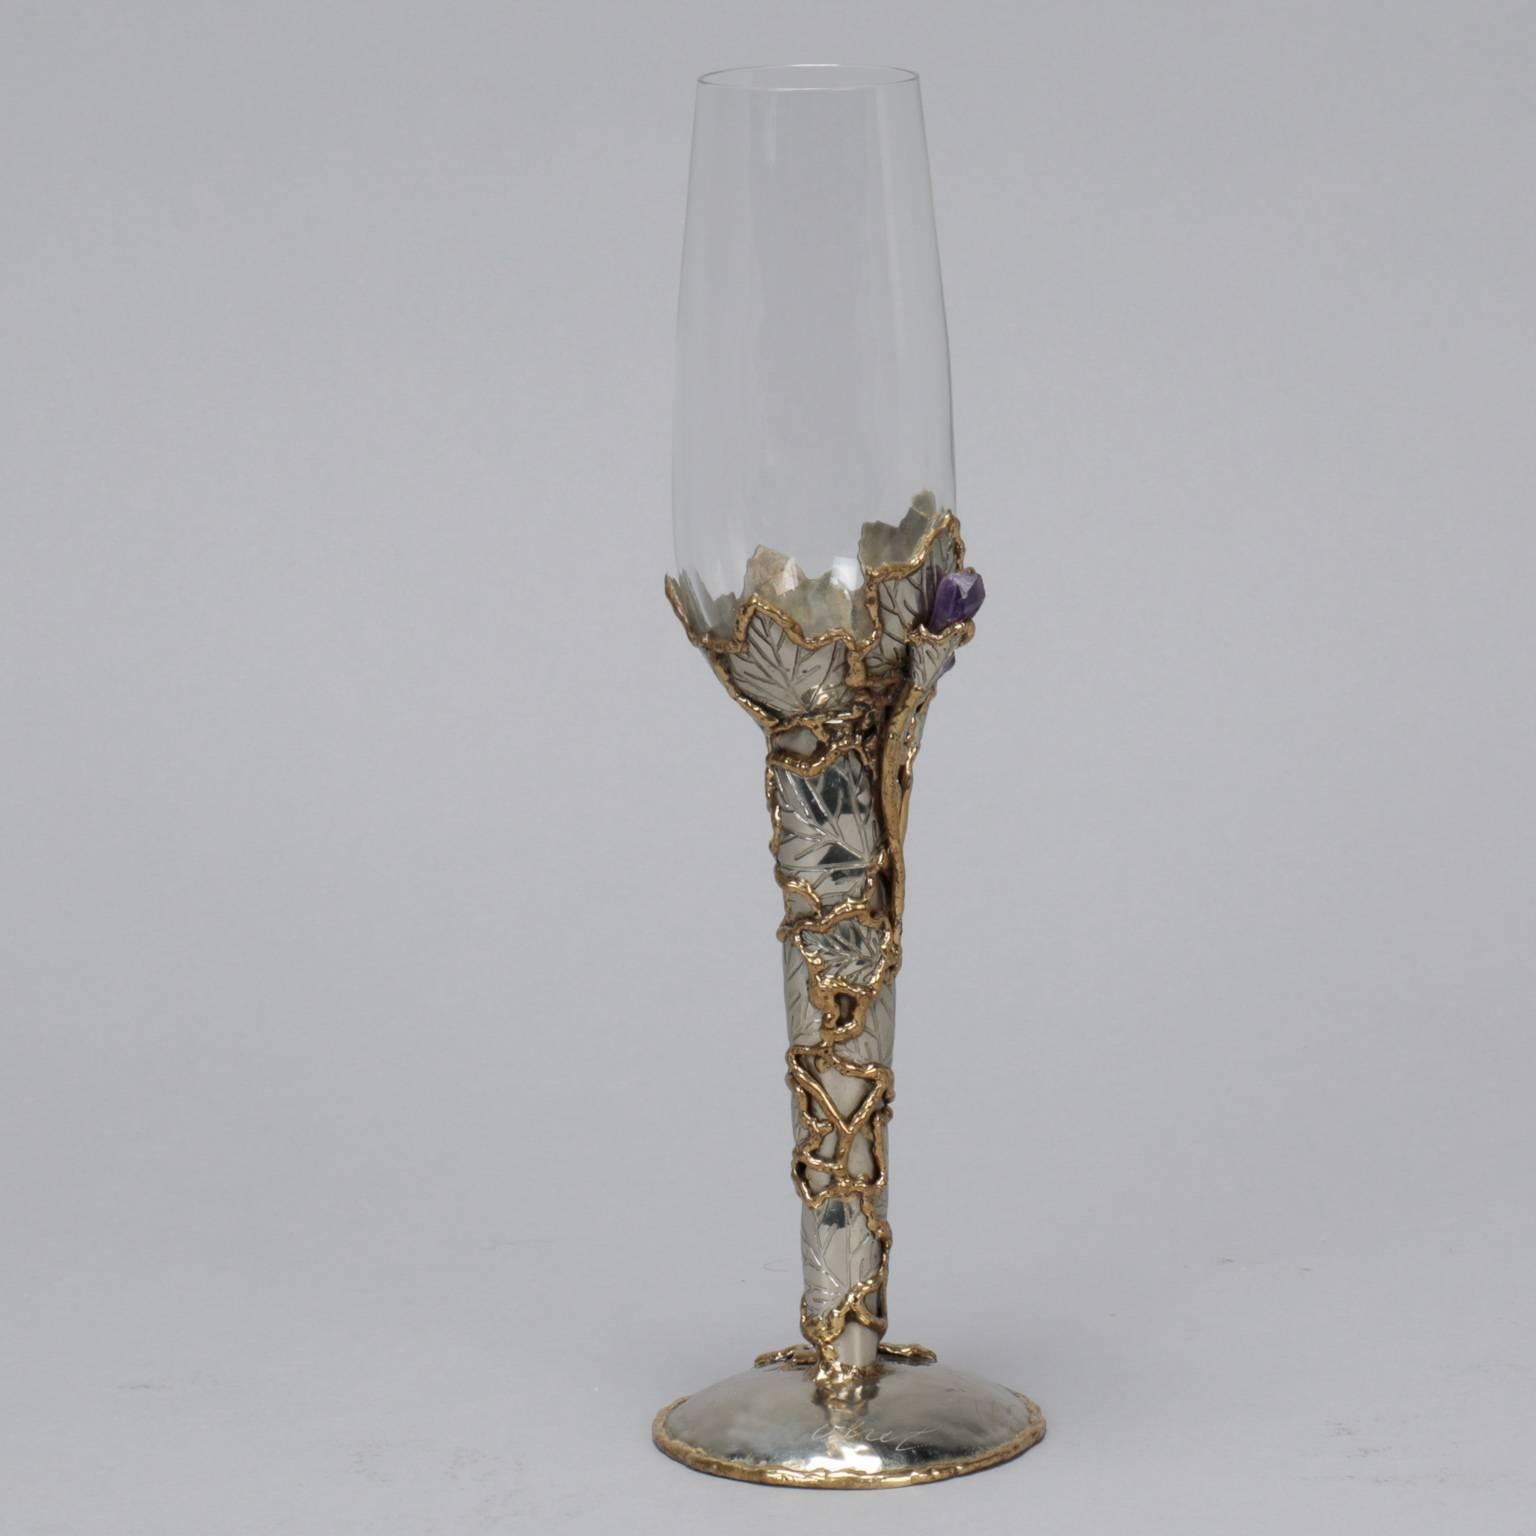 Italian Mid-Century Artisan Signed Wine Glass with Metal Surround and Amethyst Stones